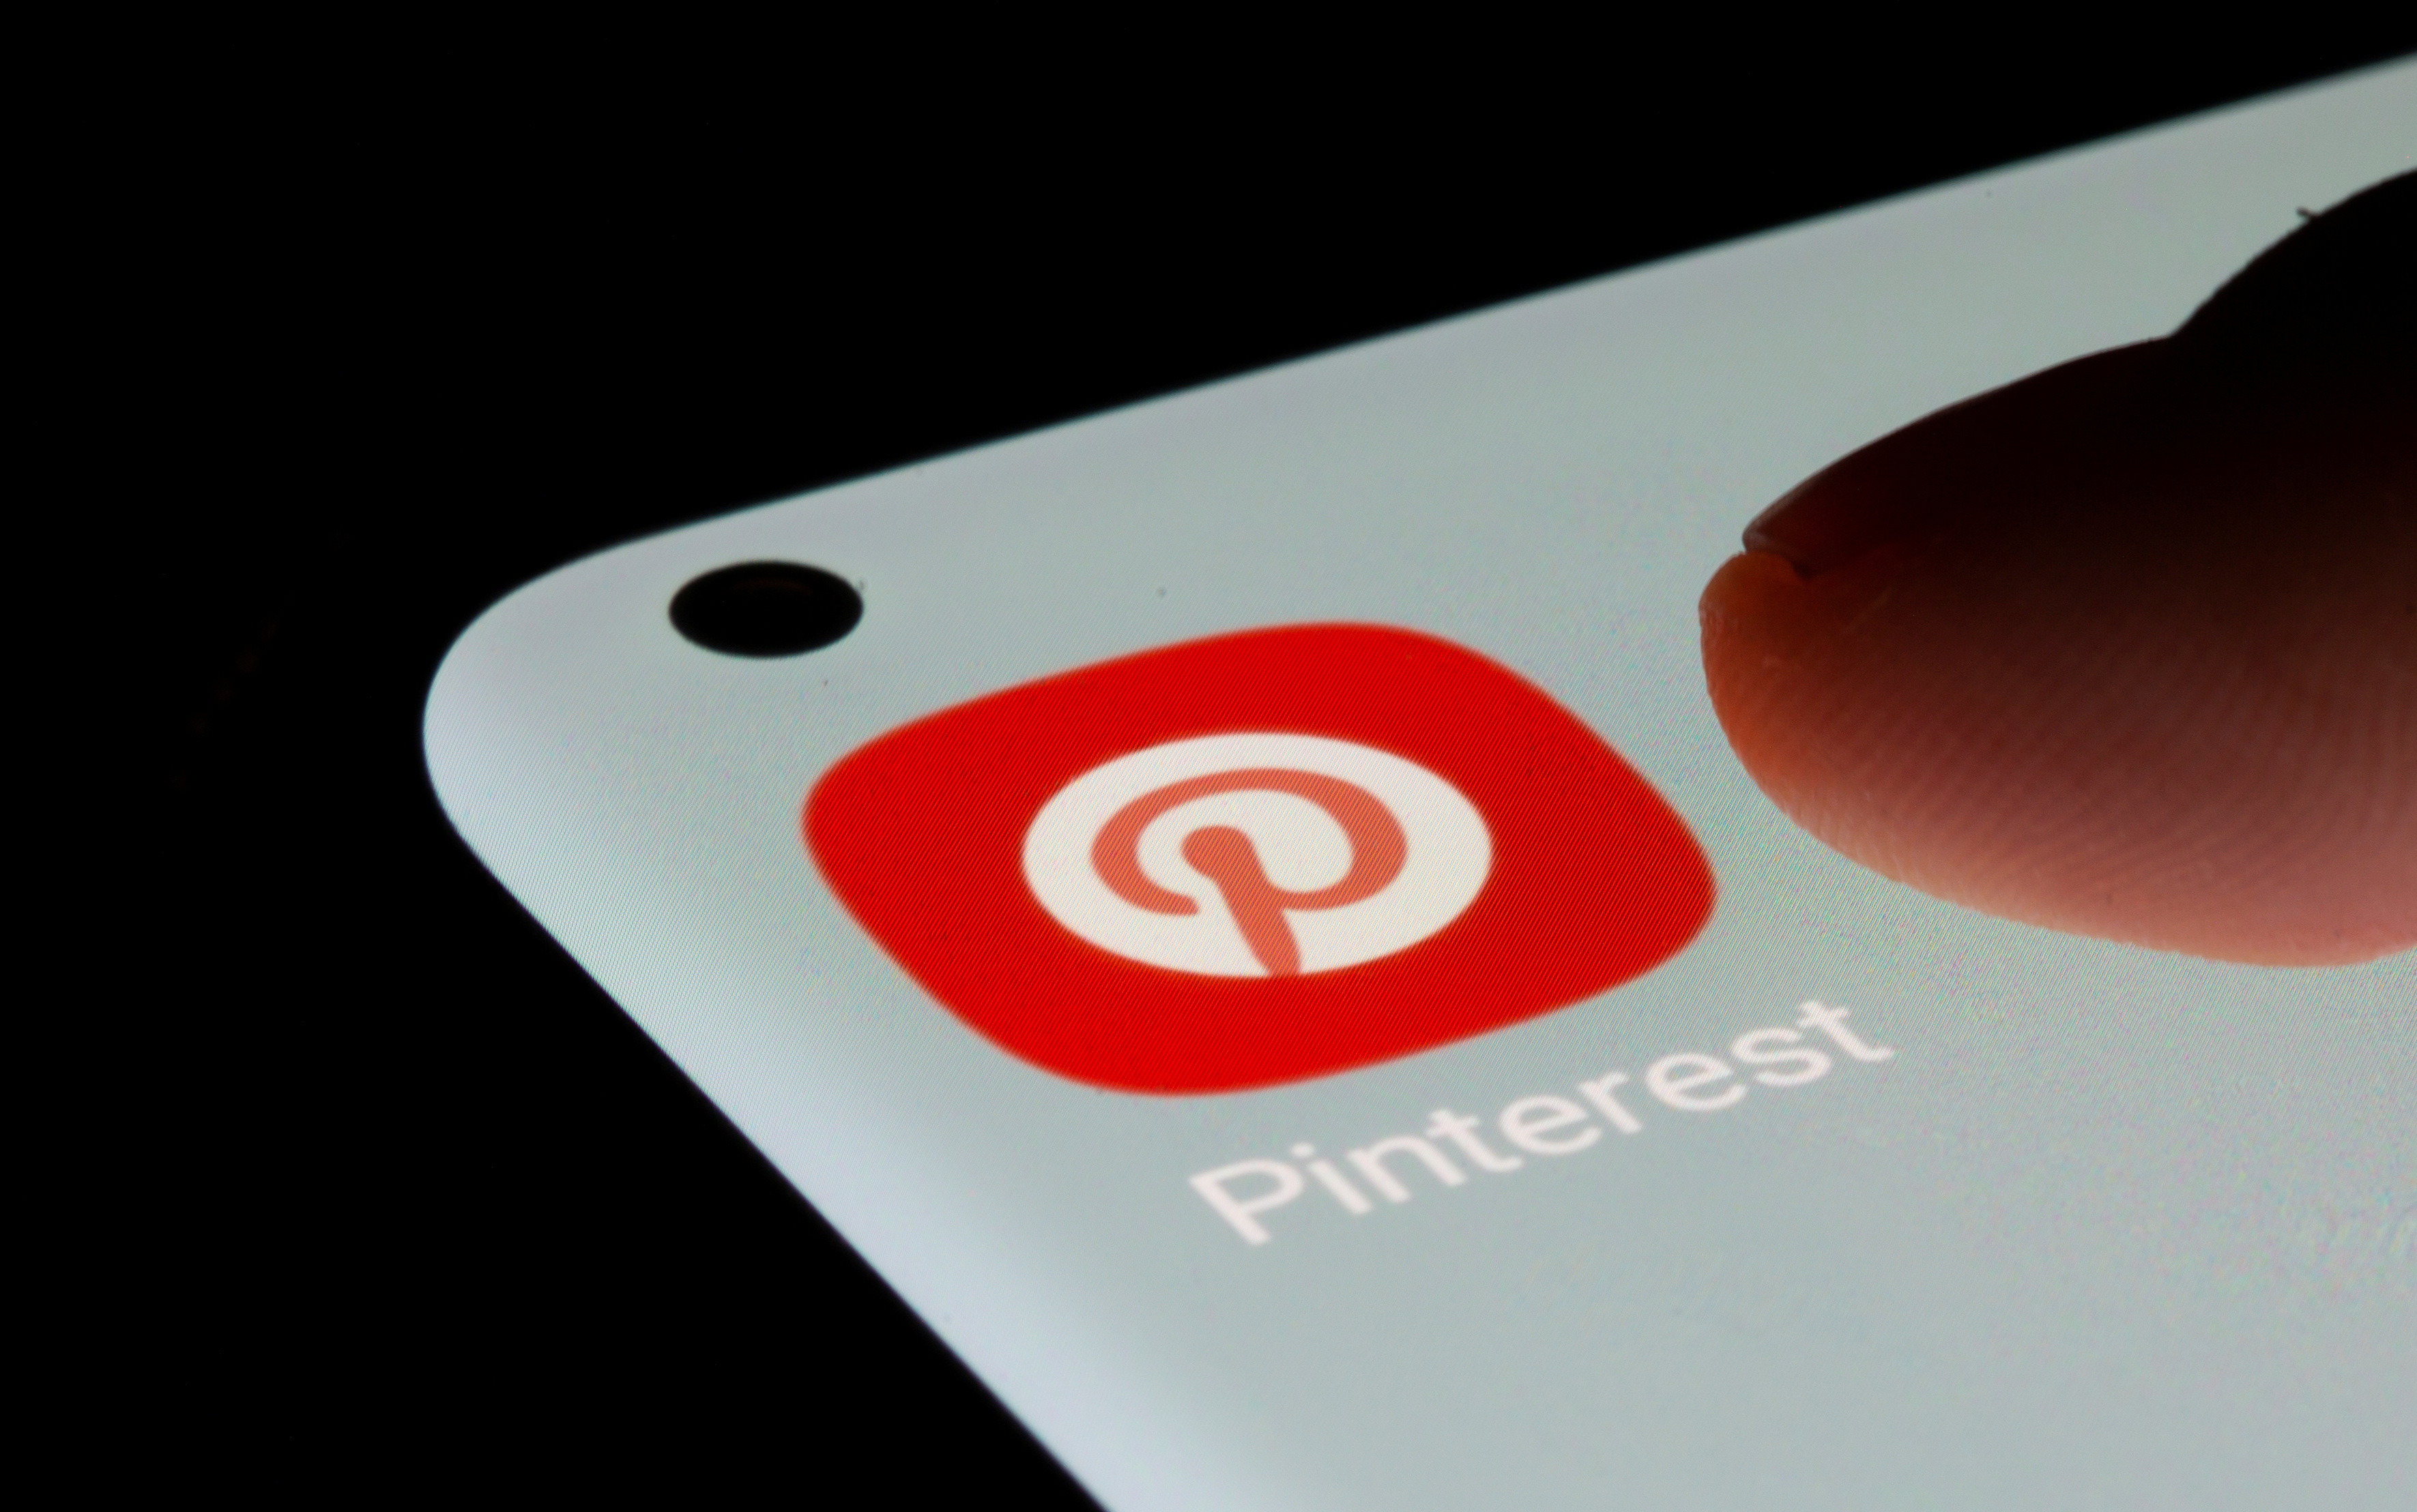 Pinterest algorithms are making it easy for creeps to make boards featuring underage girls